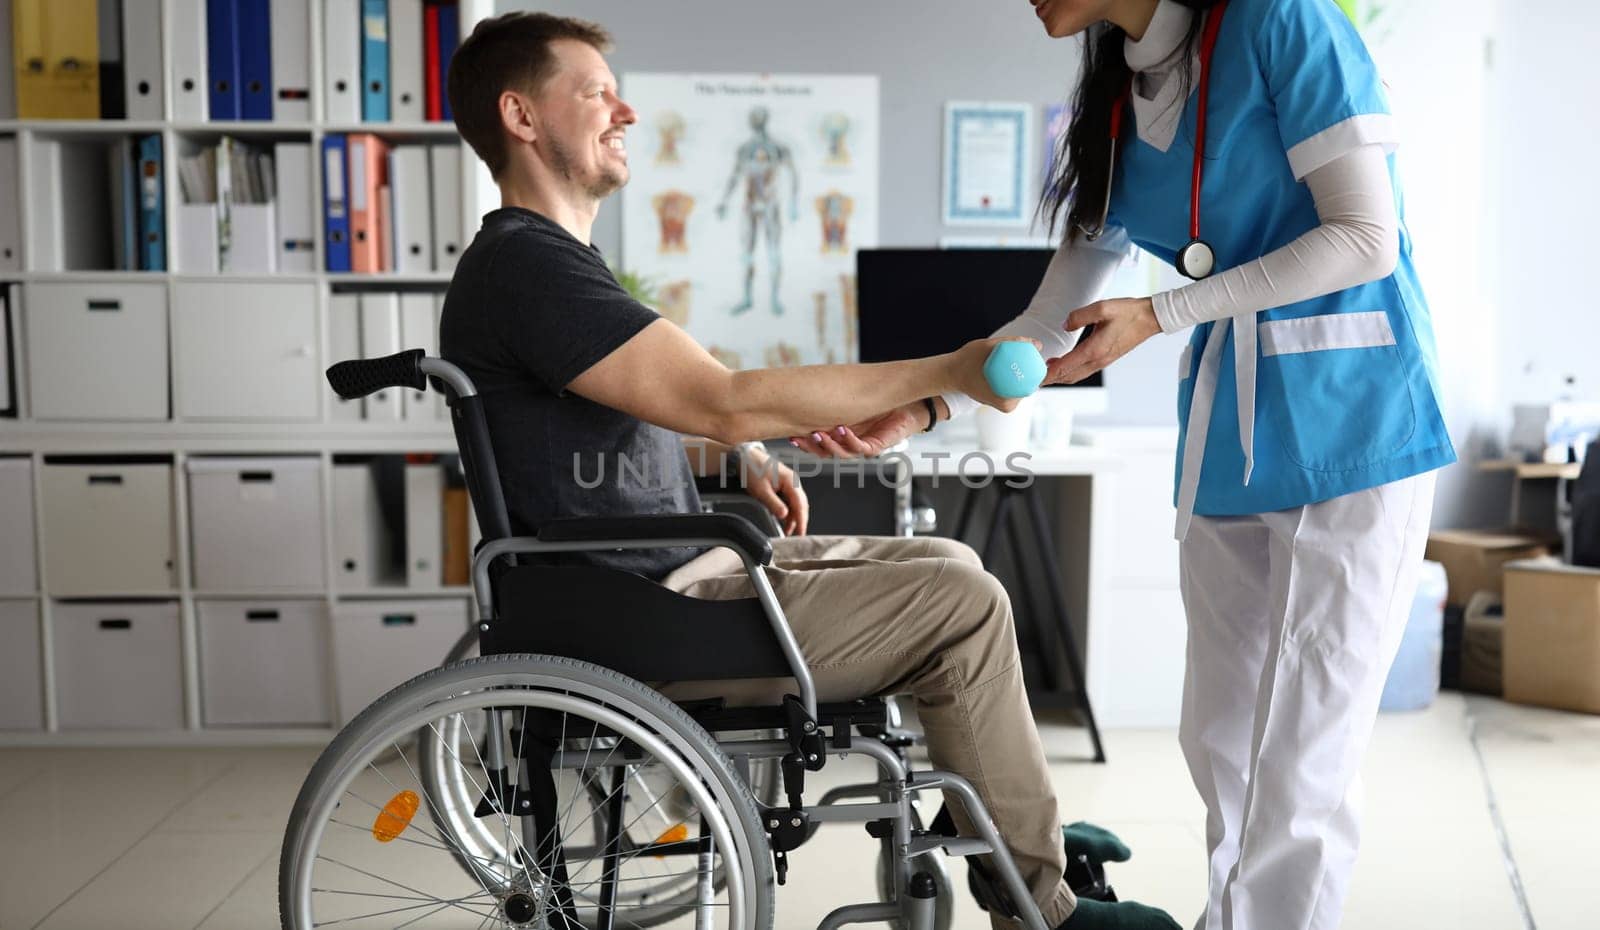 Doctor helps man on wheelchair hold dumbbell. Strengthening human parts, ability to part with wheelchair. Exercise is suitable for people with disabilities who have strength in their upper body